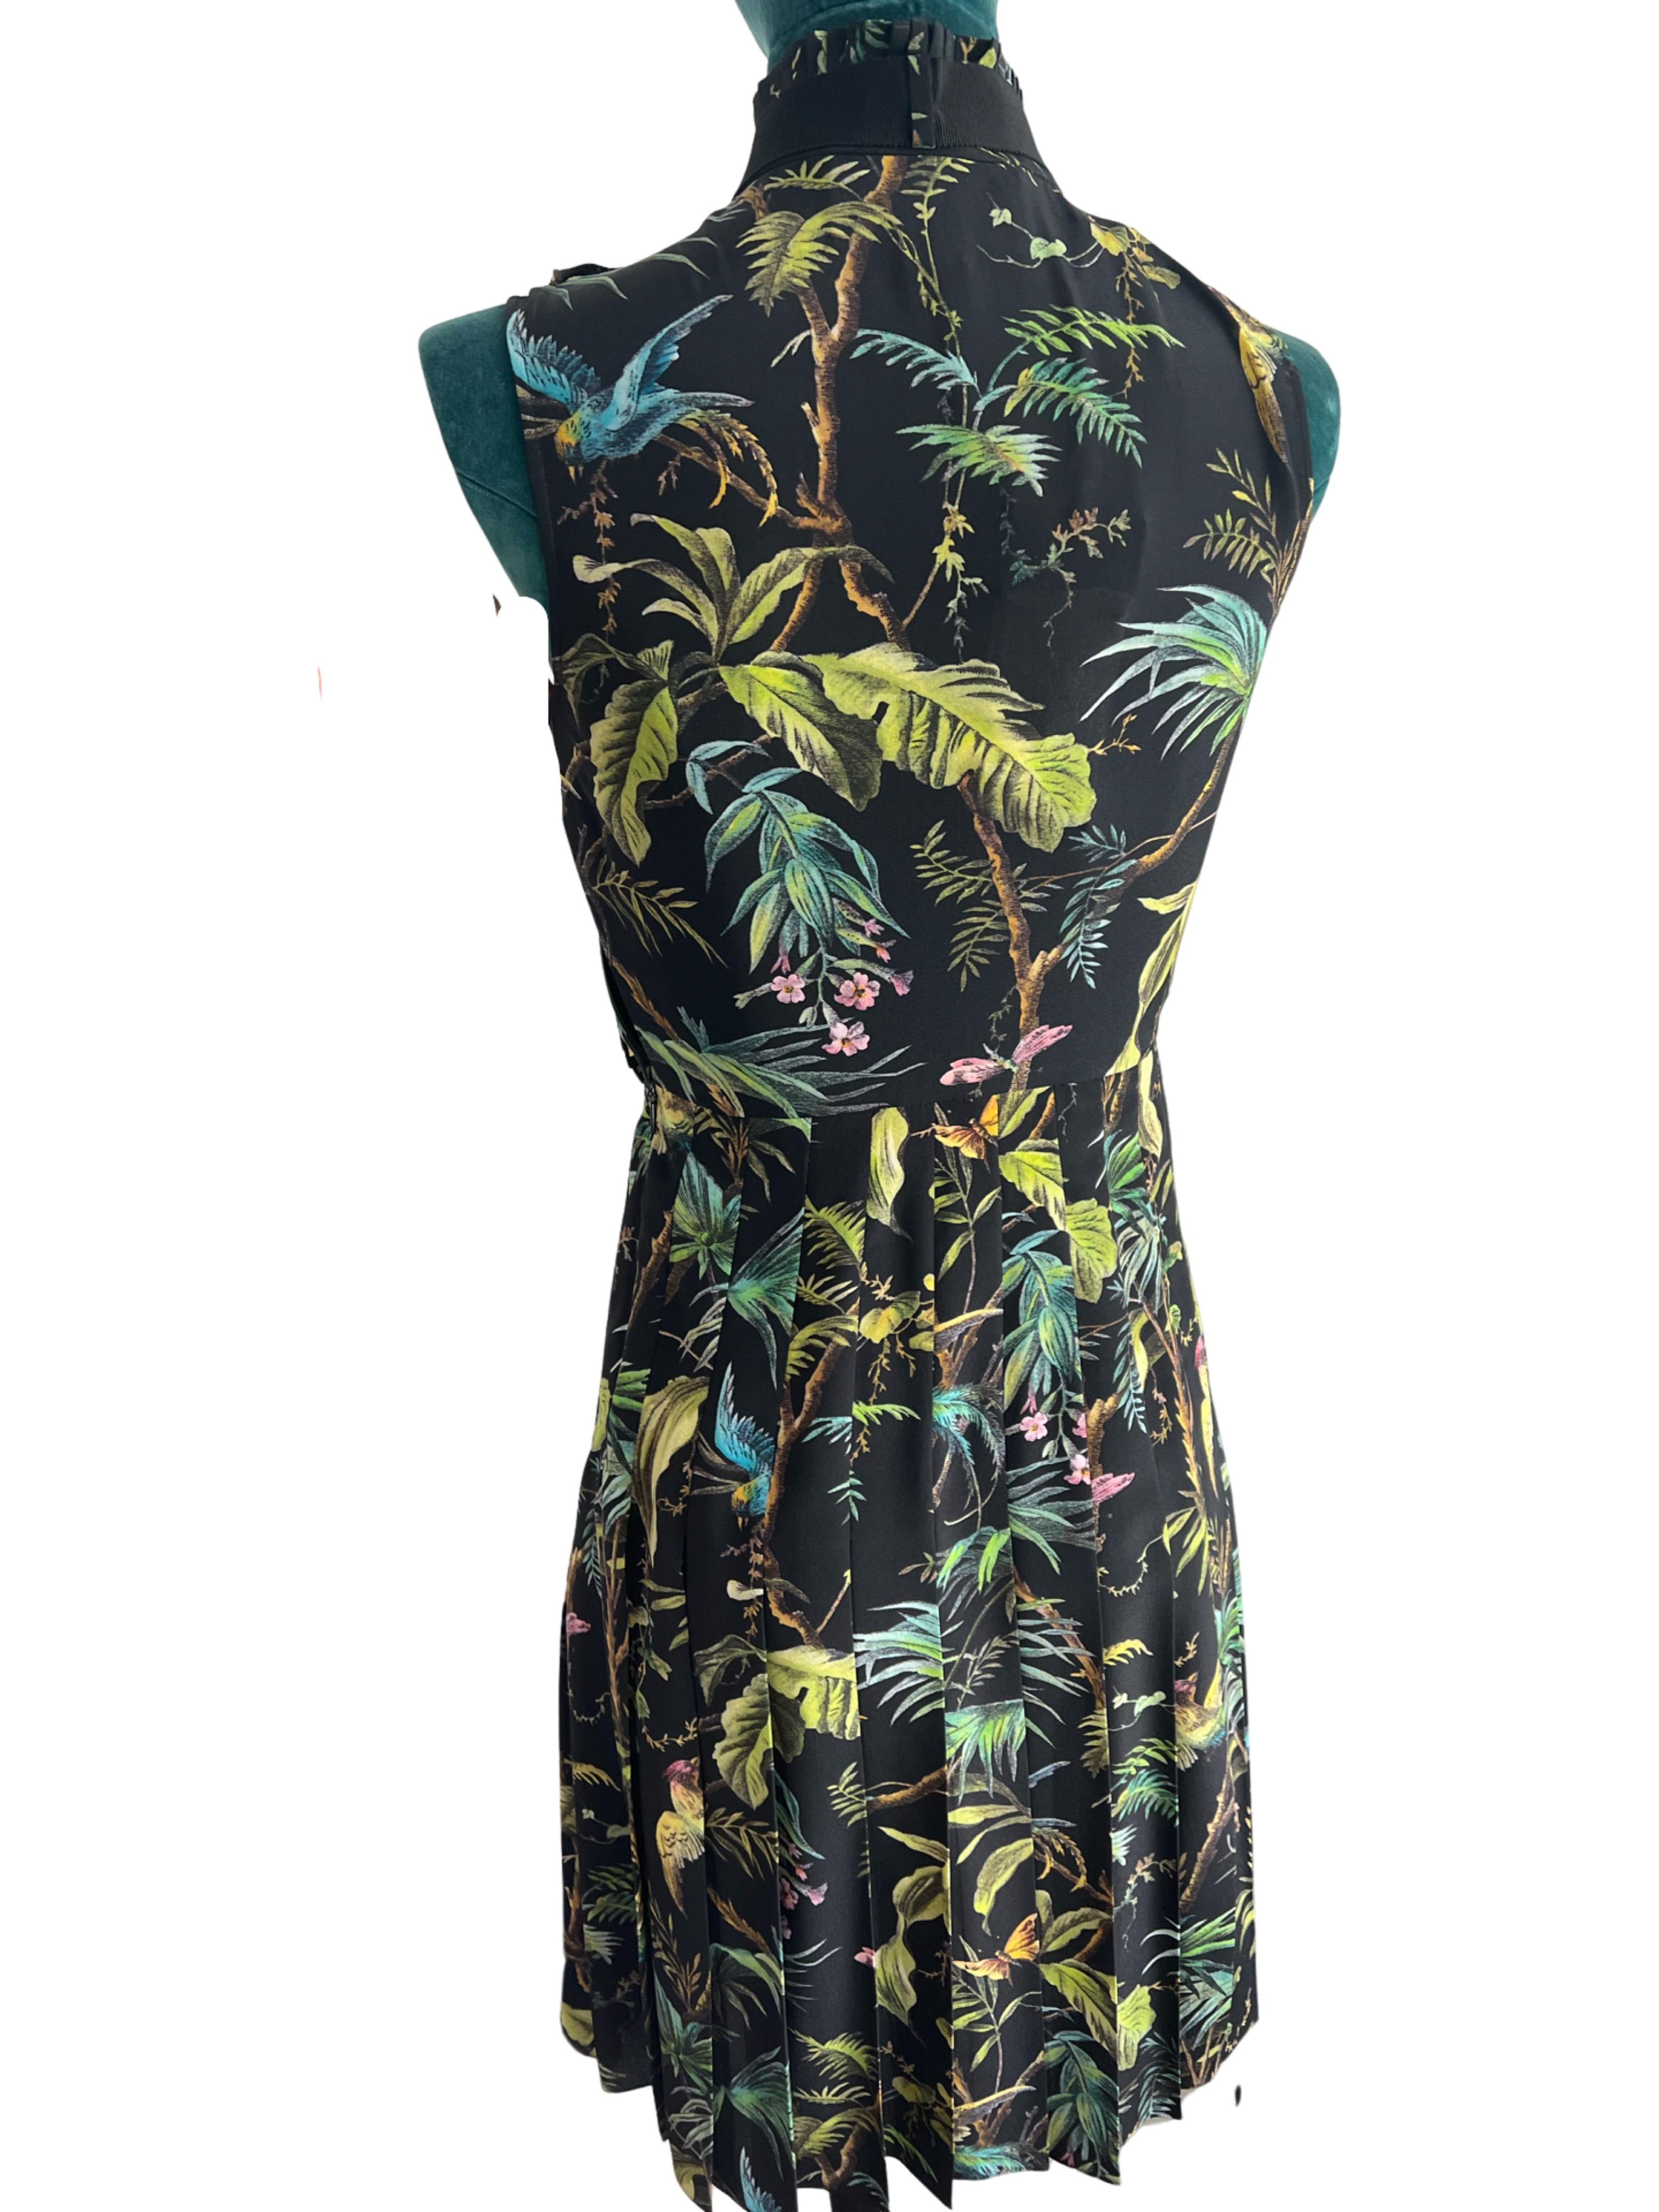 Gucci garden silk pleats dress with pearl button and truffle detail  In New Condition For Sale In Toronto, CA